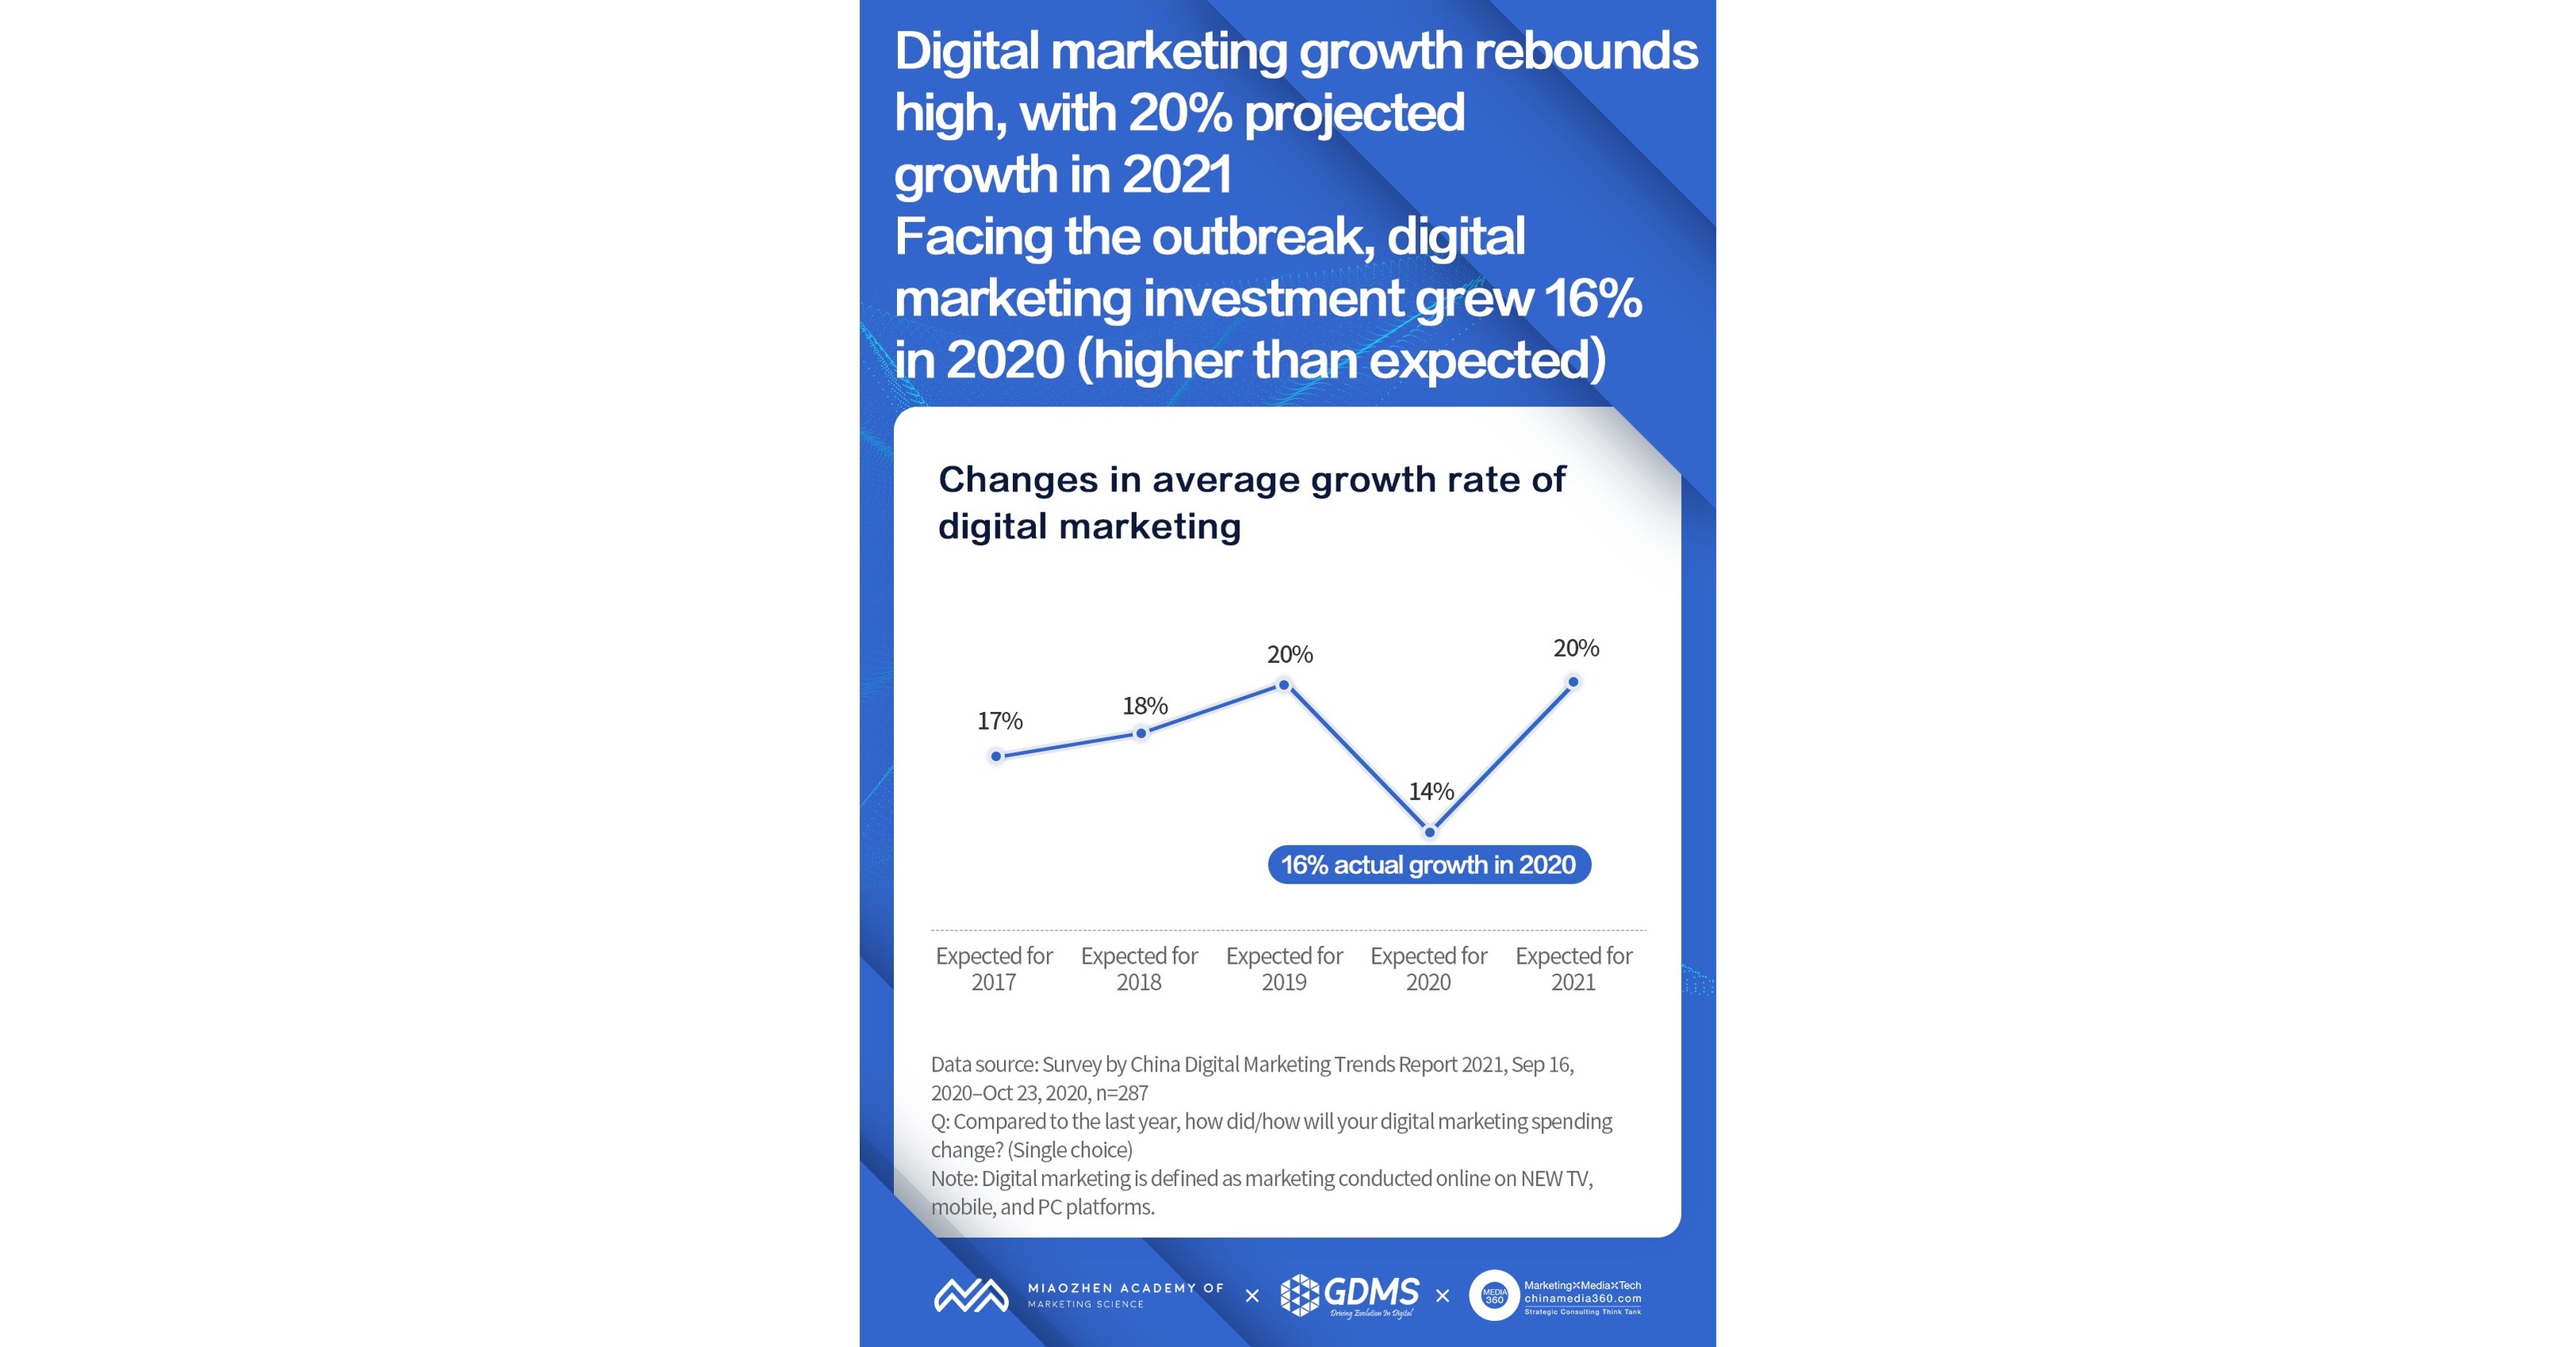 Digital marketing spending in China to grow 20{b7957974ac228b8f2b2640b69801411293490bb3d7d6382f1a99eb7b62ccaeae} in 2021, says China Digital Marketing Trends 2021 report